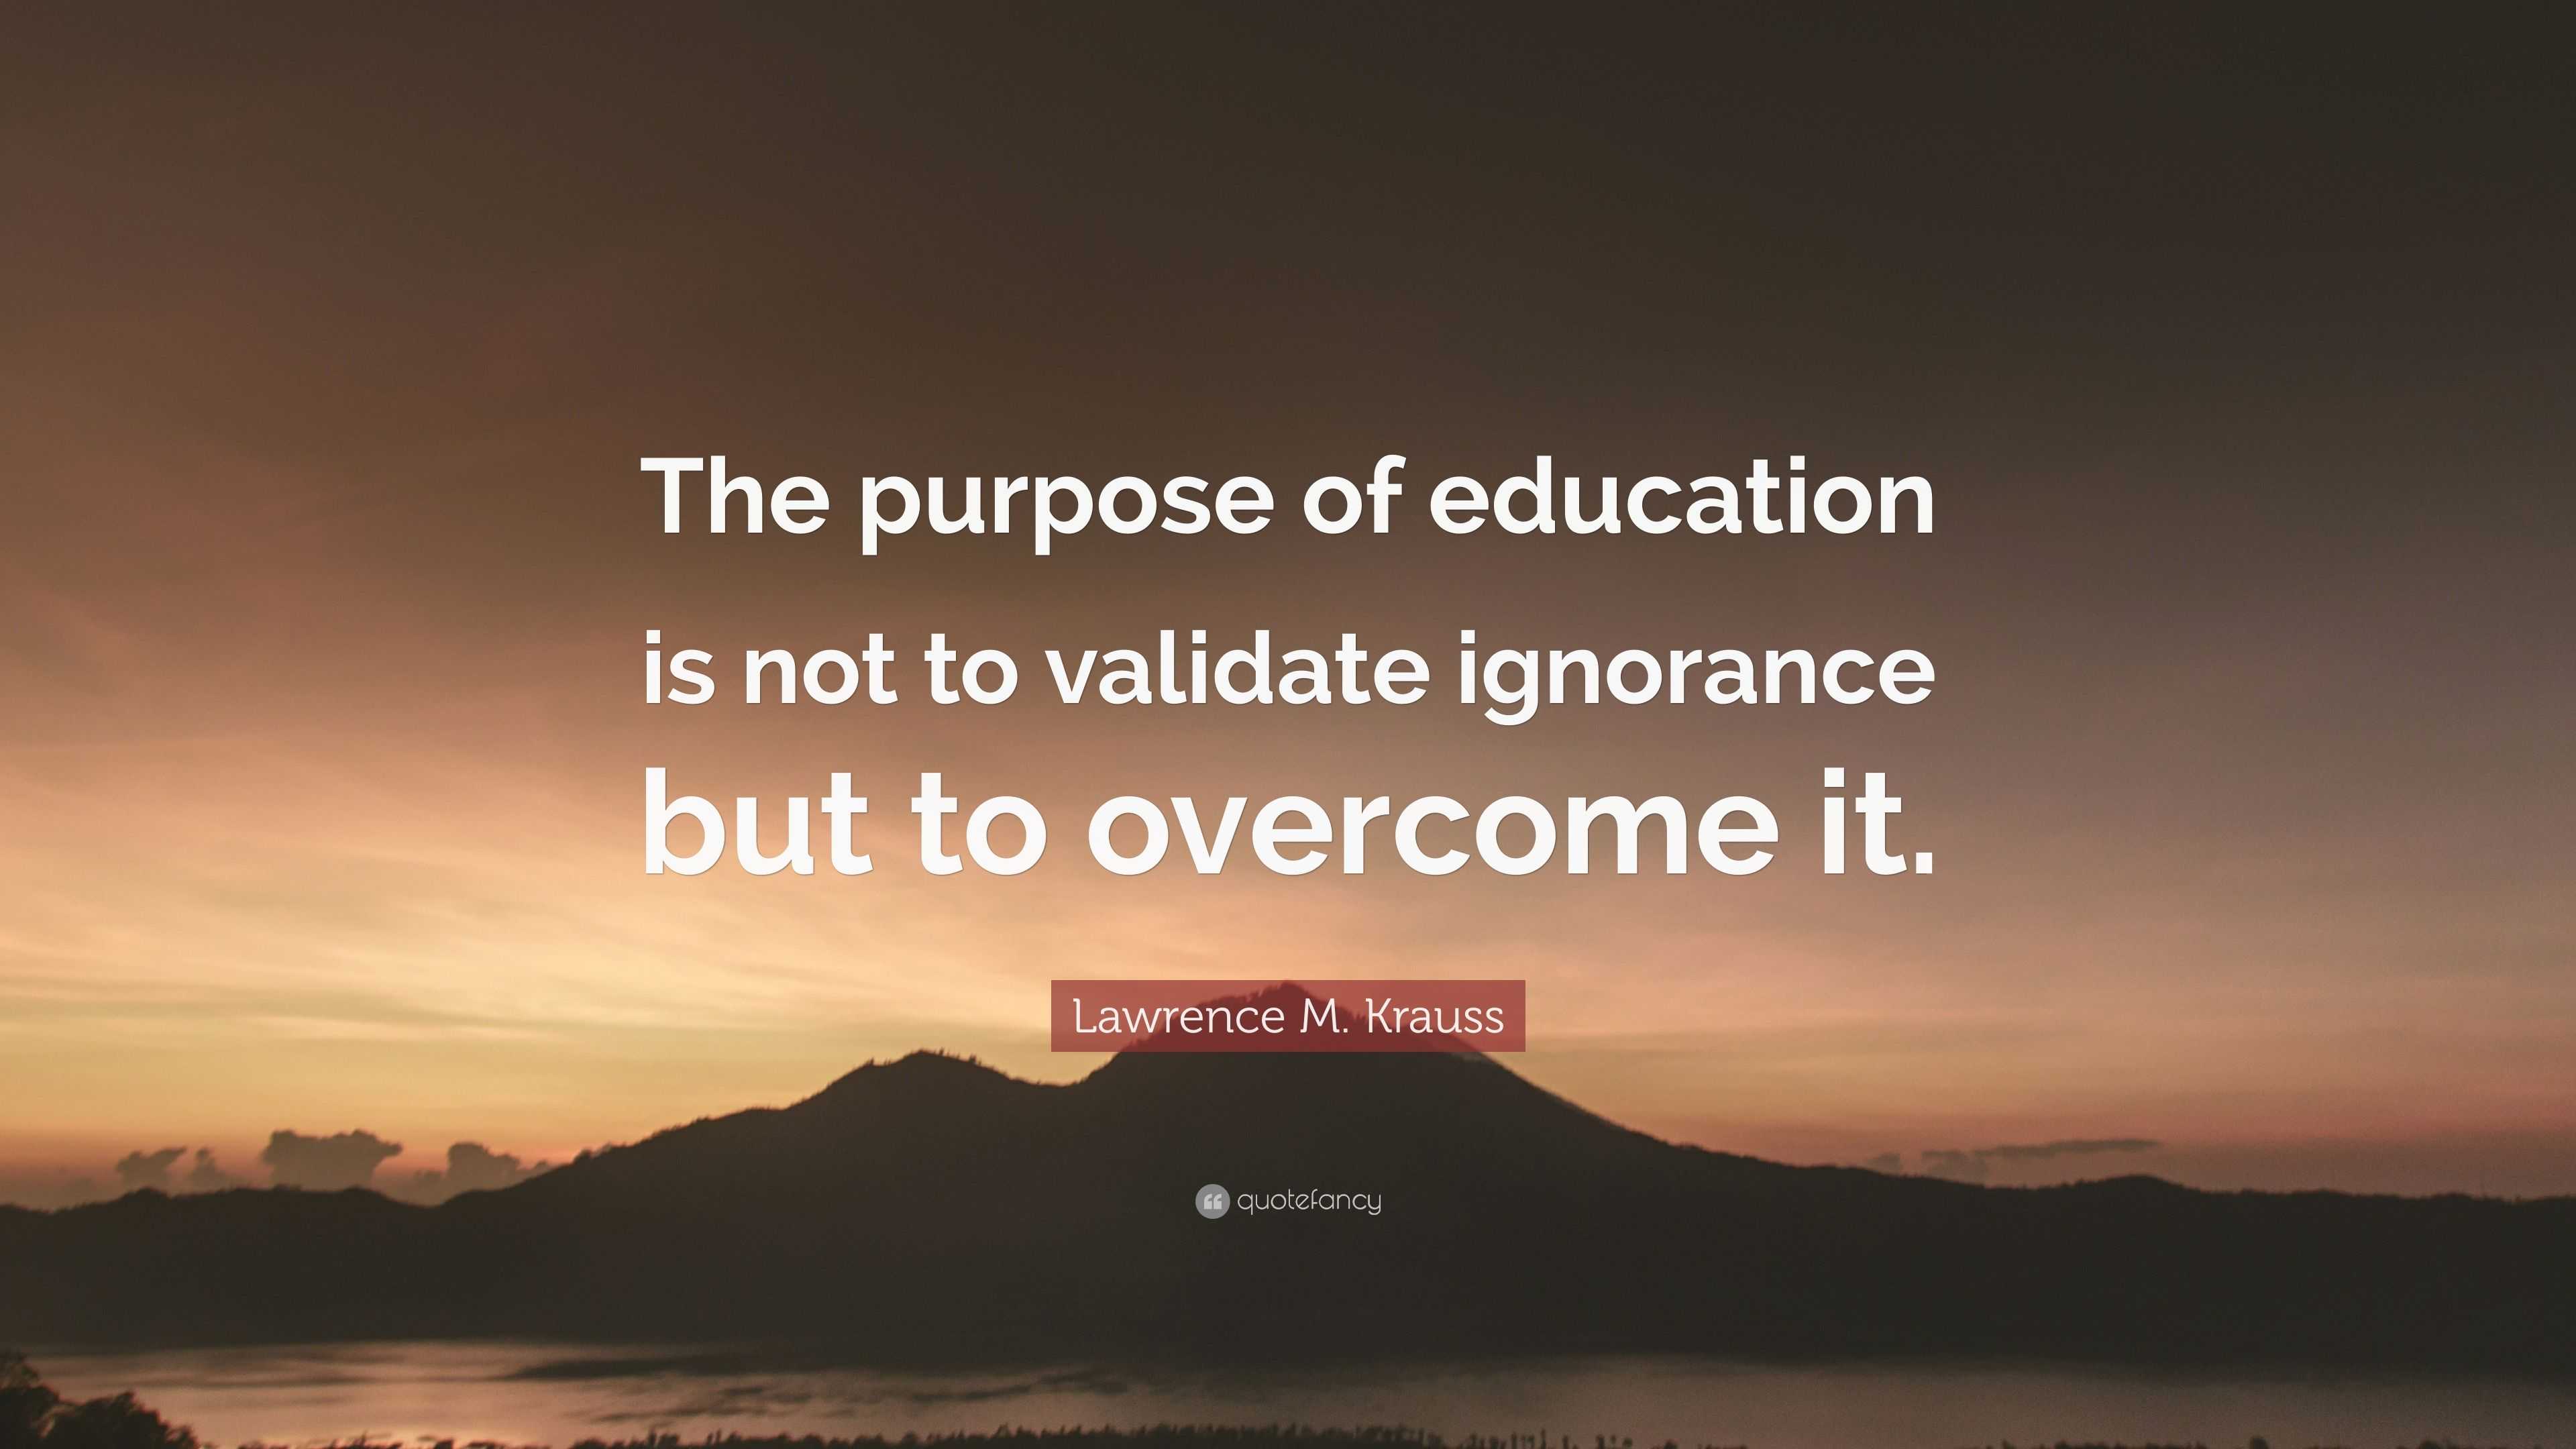 Lawrence M. Krauss Quote: “The purpose of education is not to validate